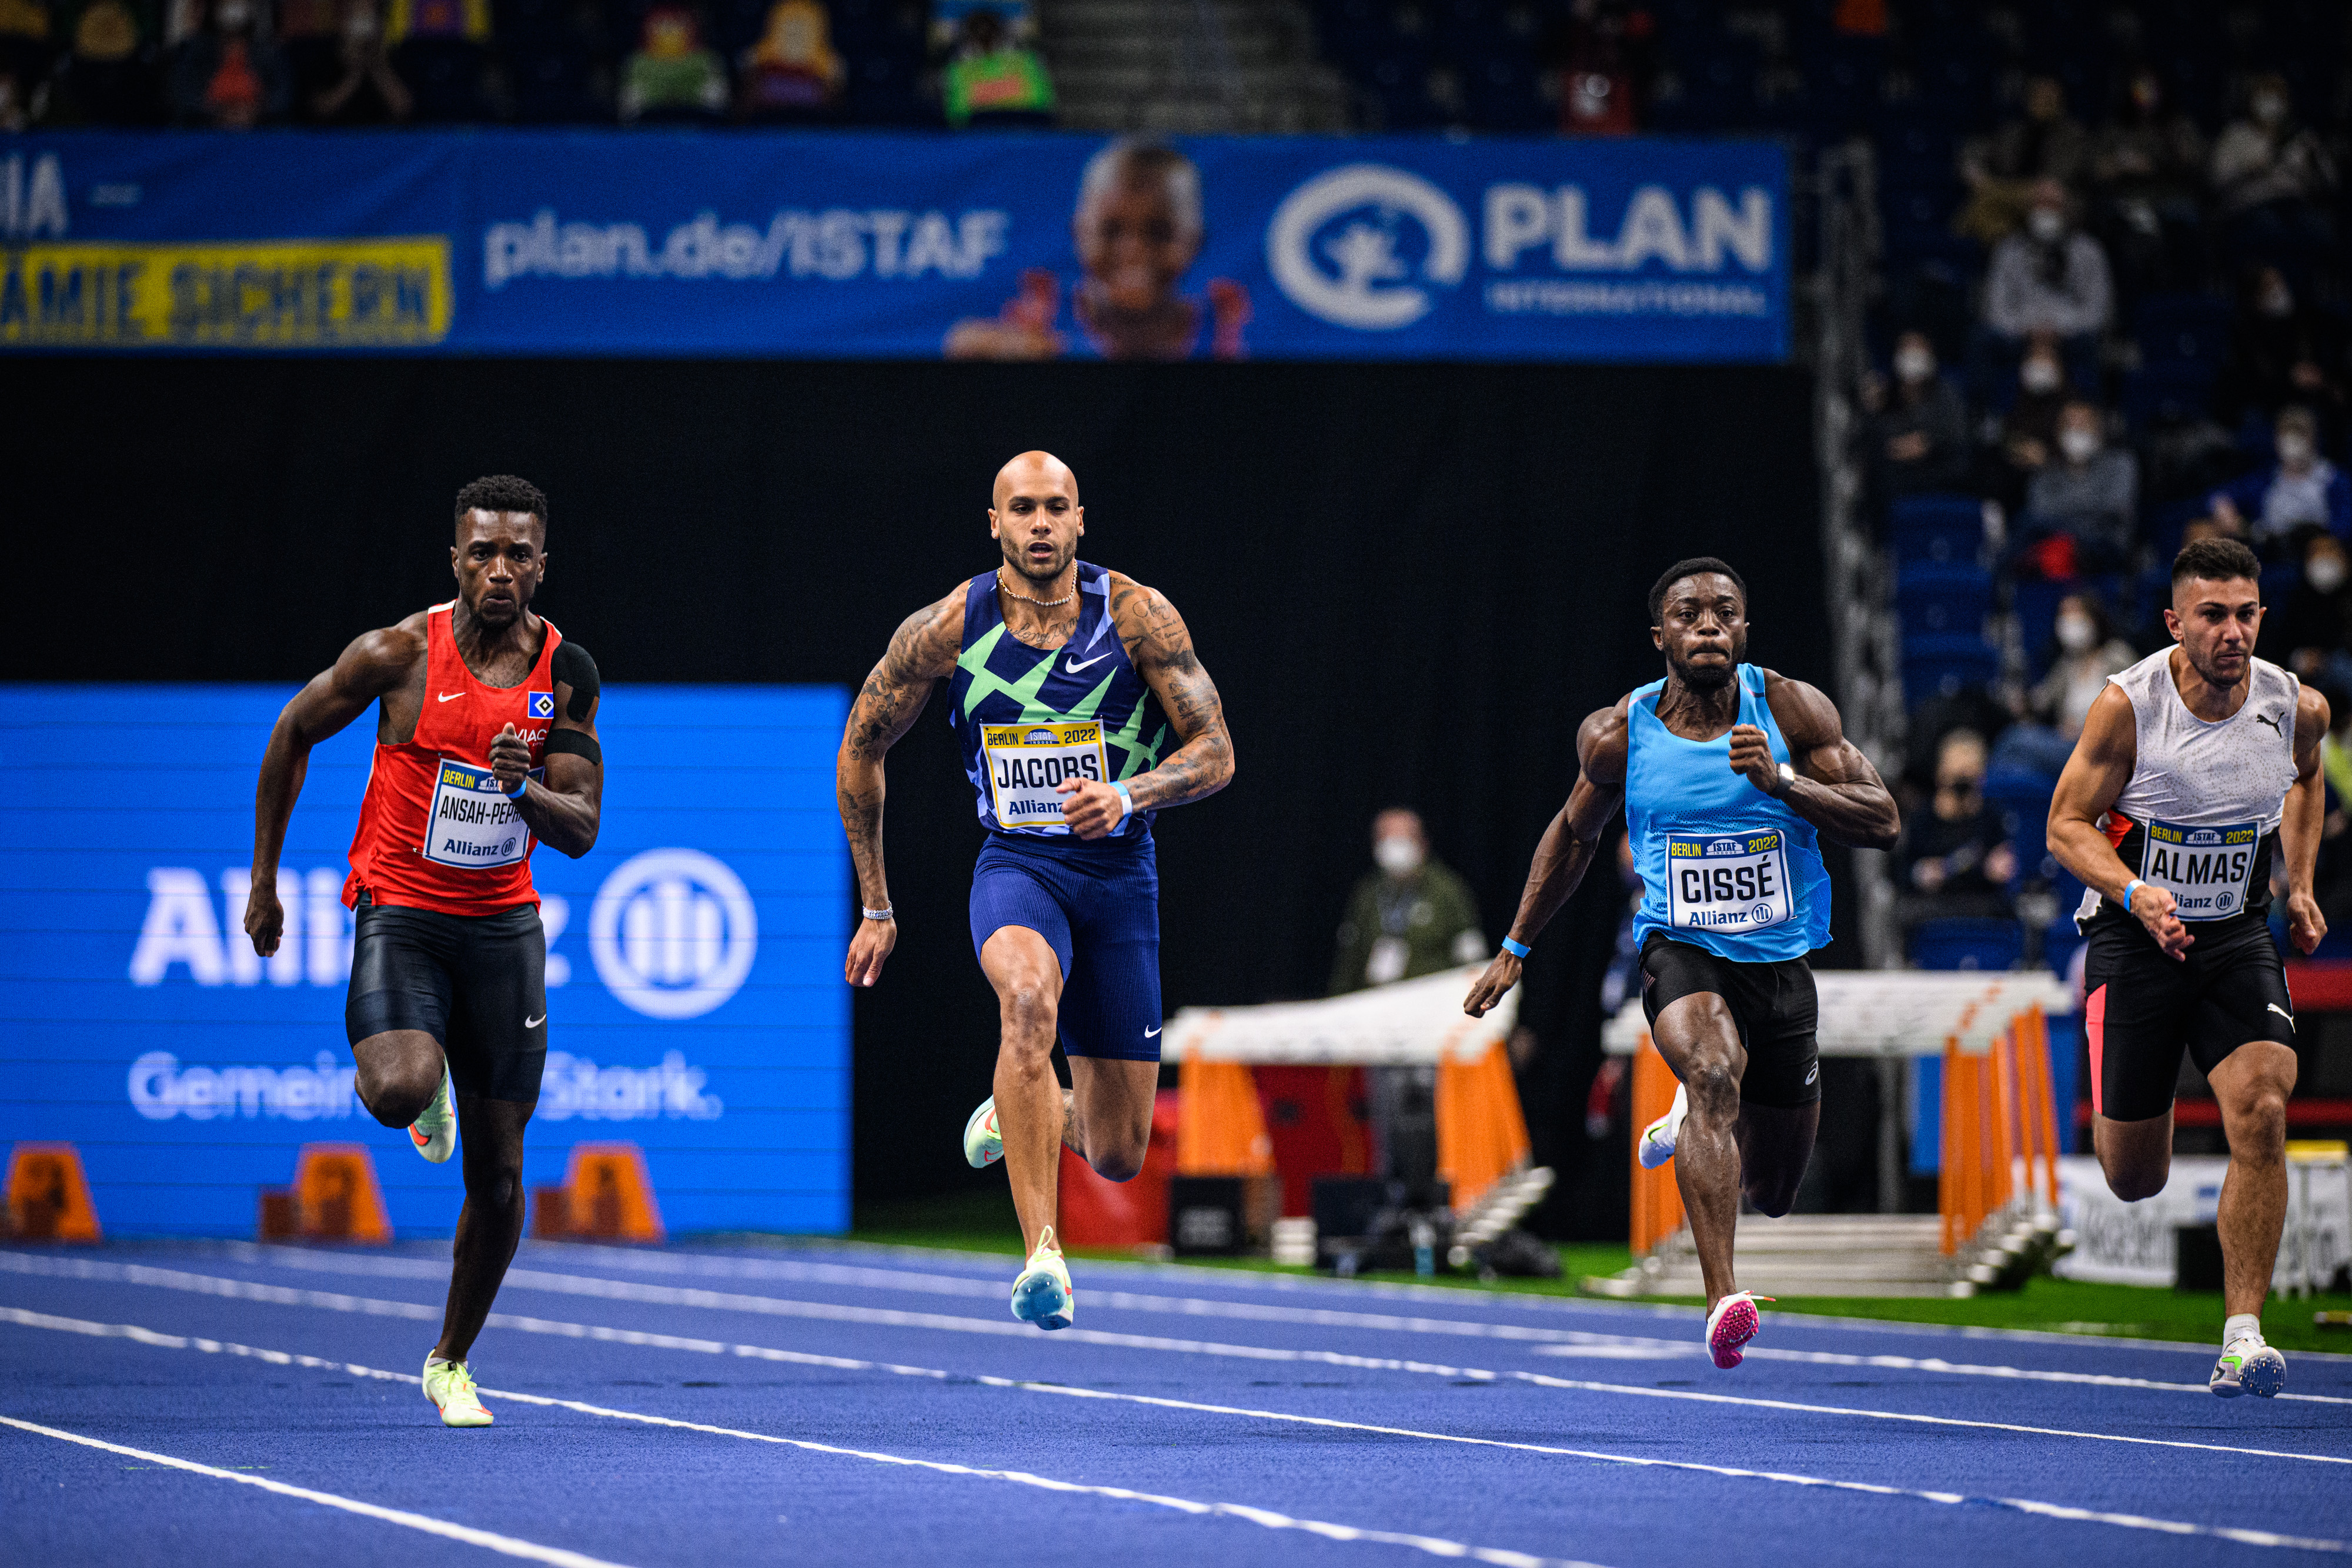 Jacobs comes back winning, Duplantis just misses world record in Berlin